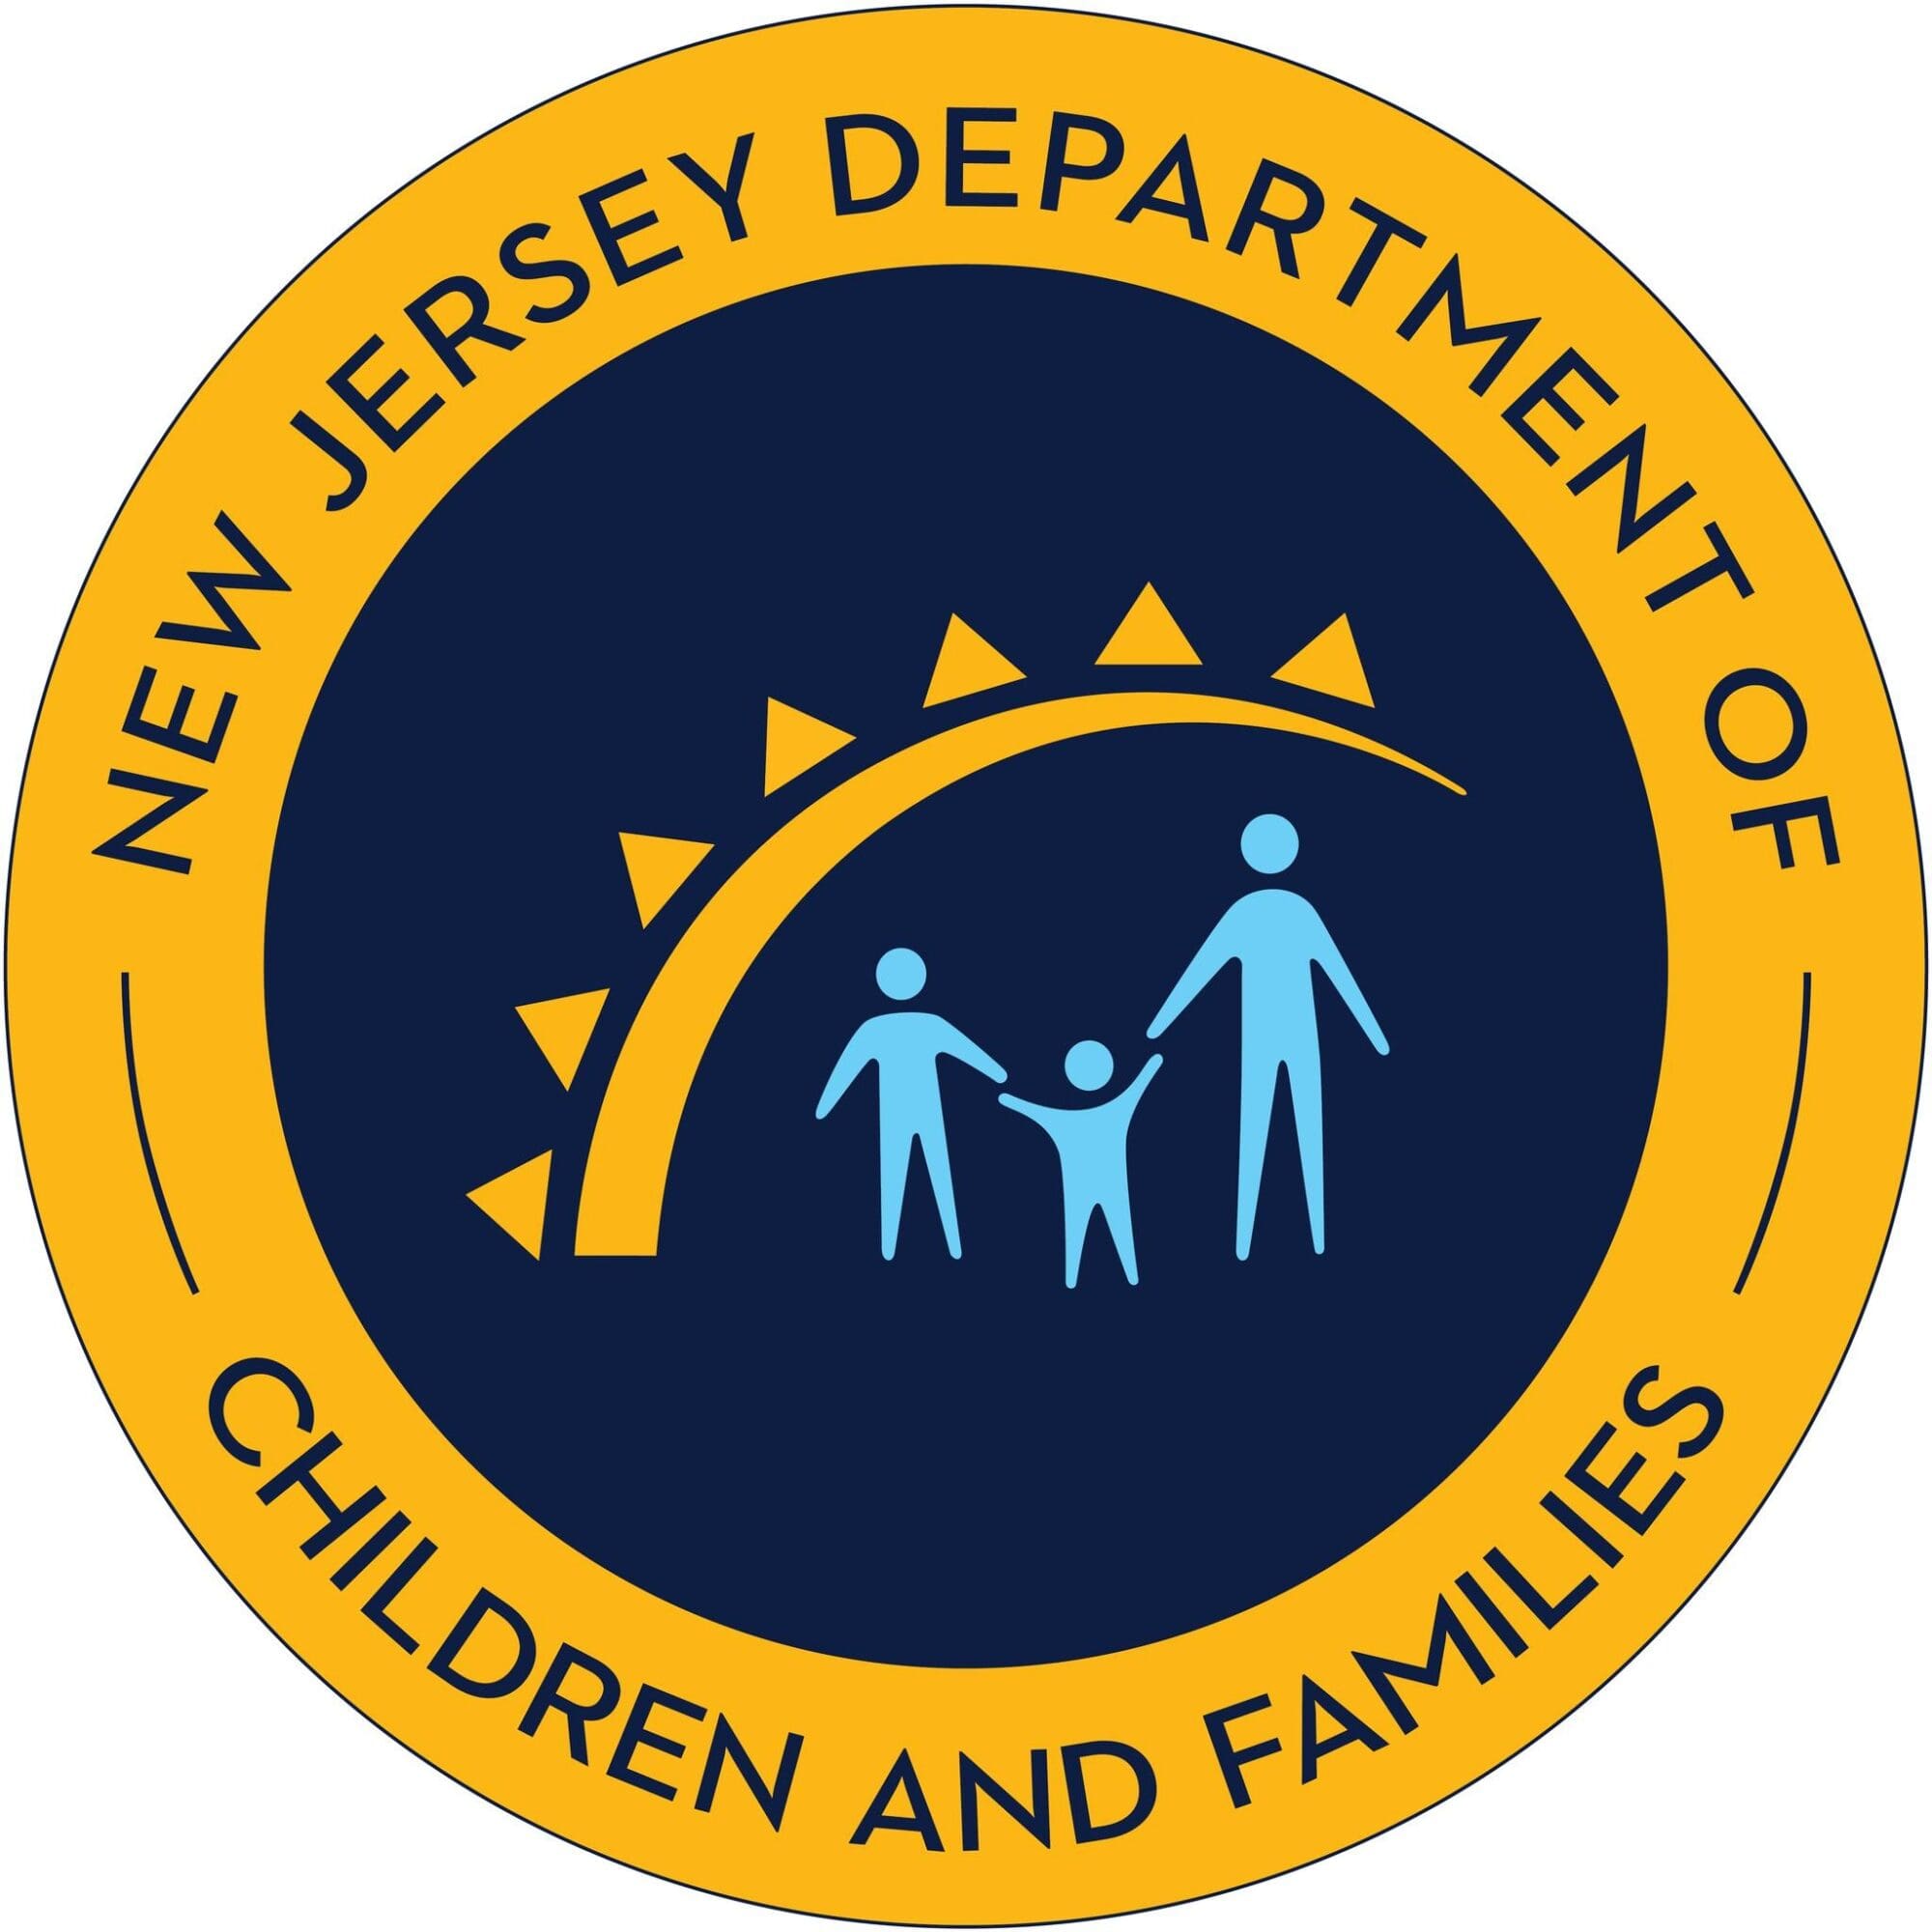 New Jersey Department of children and families